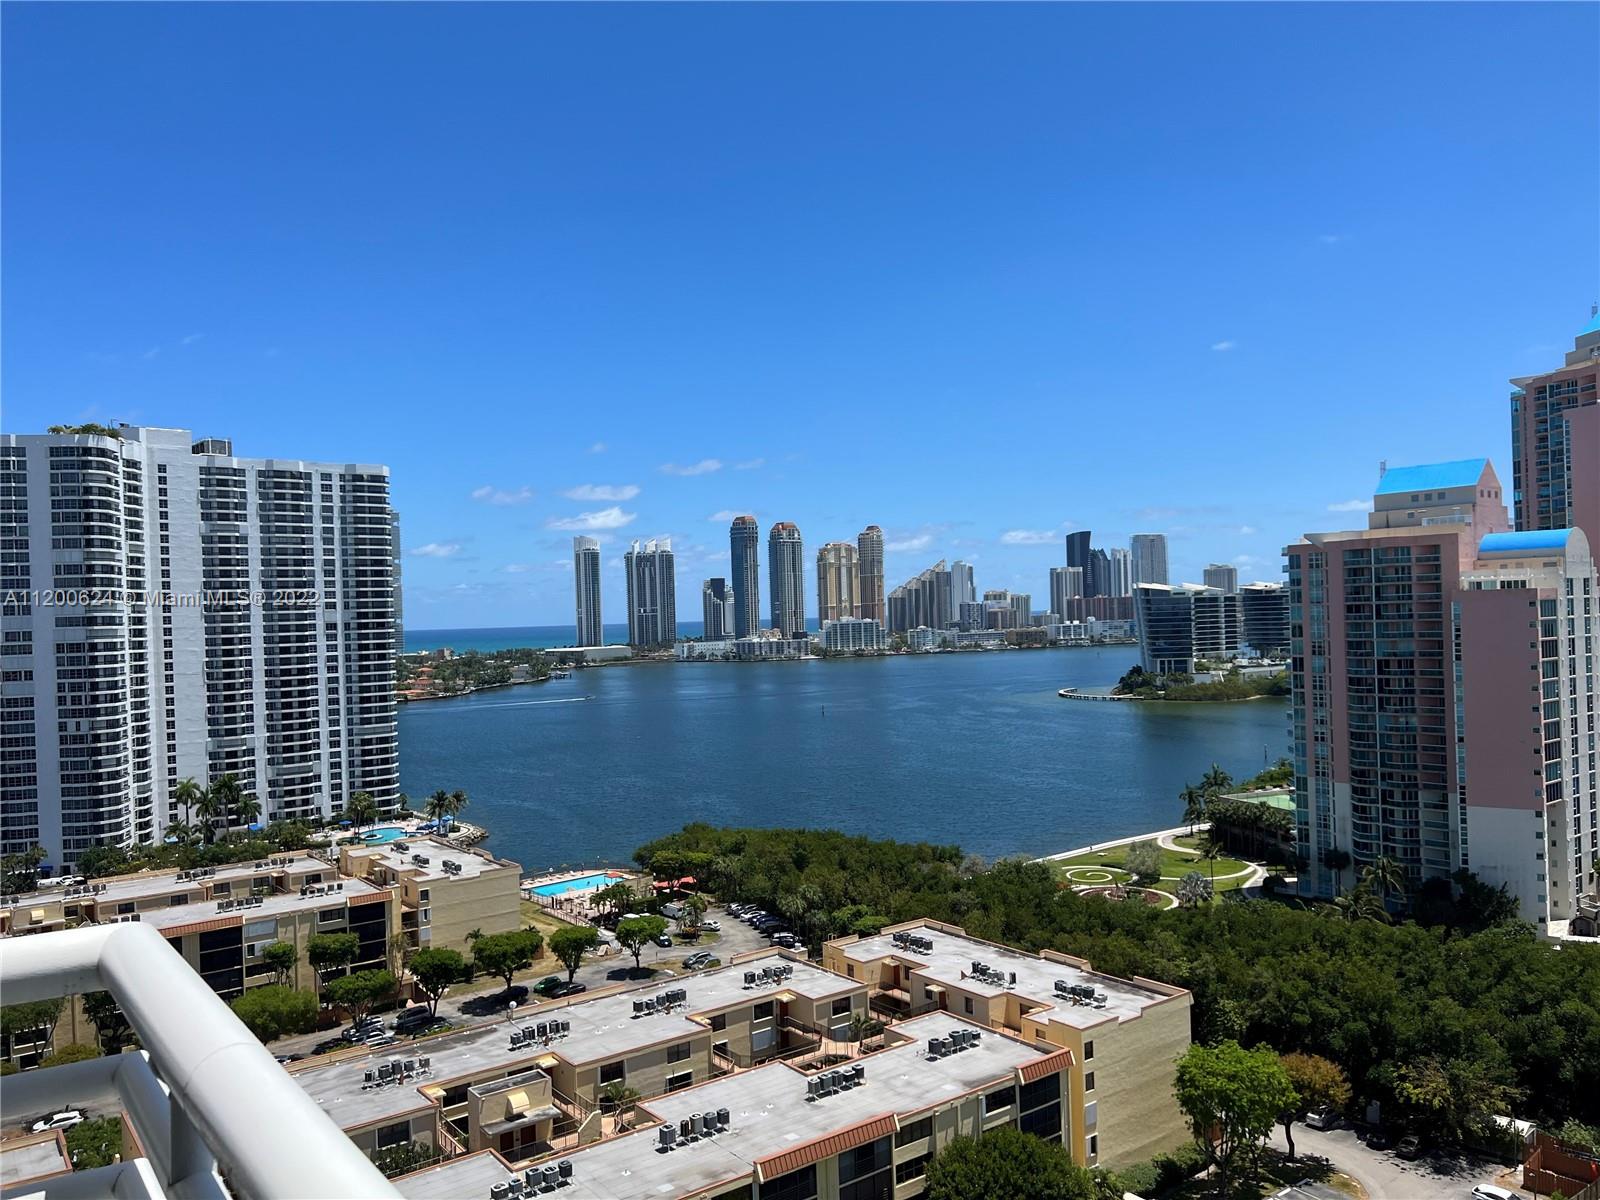 Beautifull apartment in the heart of AVENTURA. If you want to have a resort living this is the apartment that you are looking for.It has a Big bedroom and 2 full baths.It has a big
walking closet and closets in everywhere.It has an amazing view!! It has washer and Dryer inside the unit. Equal Housing Opportunity.